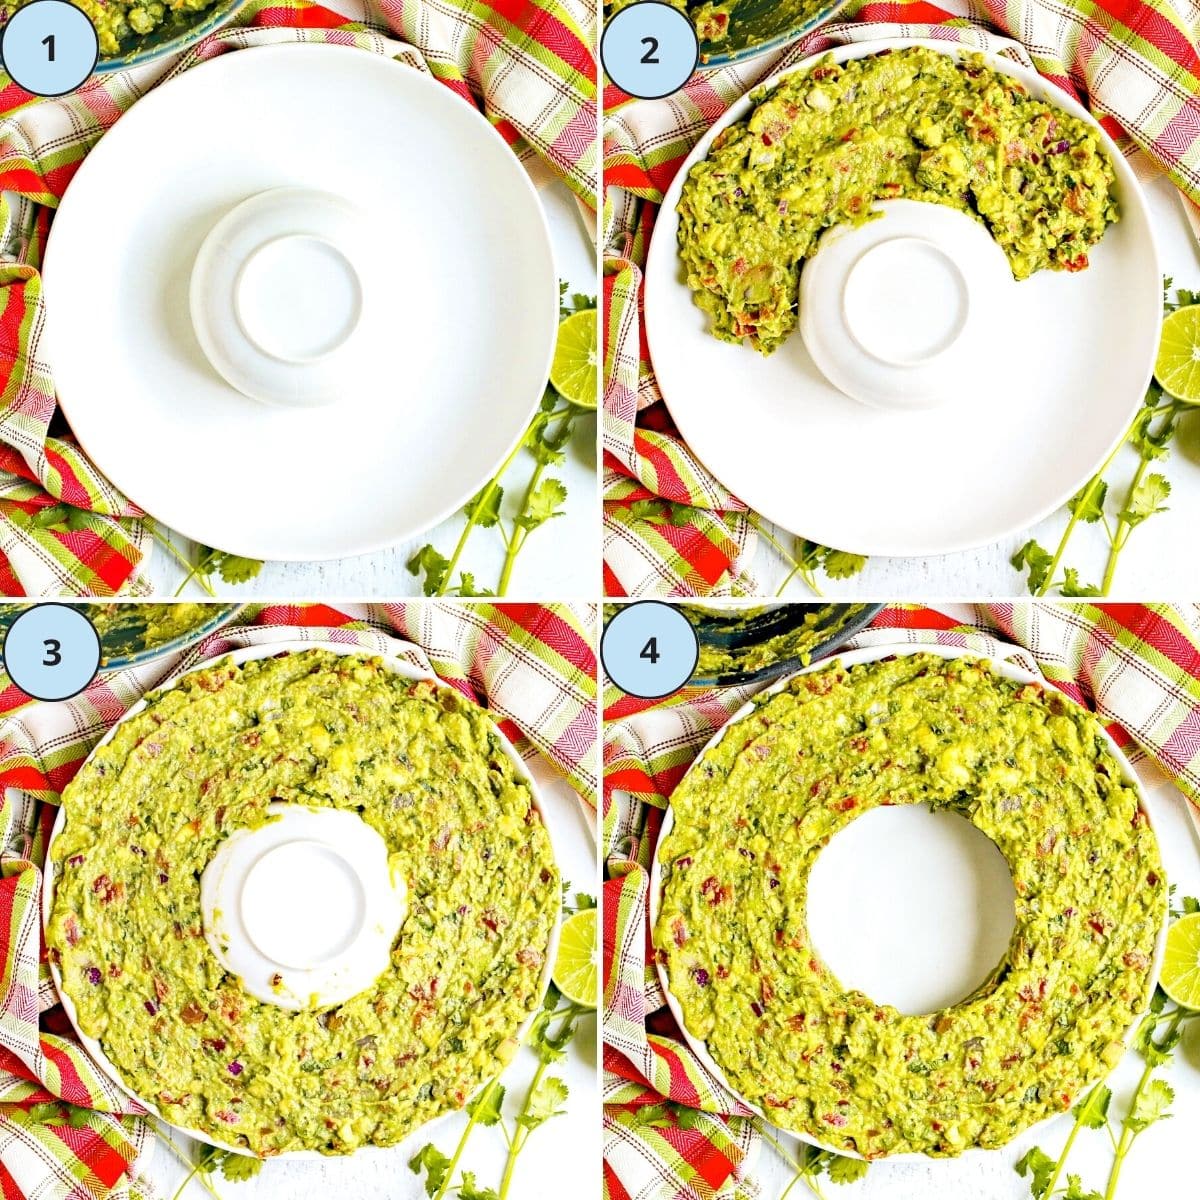 Collage of 4 numbered images showing how to make this recipe.